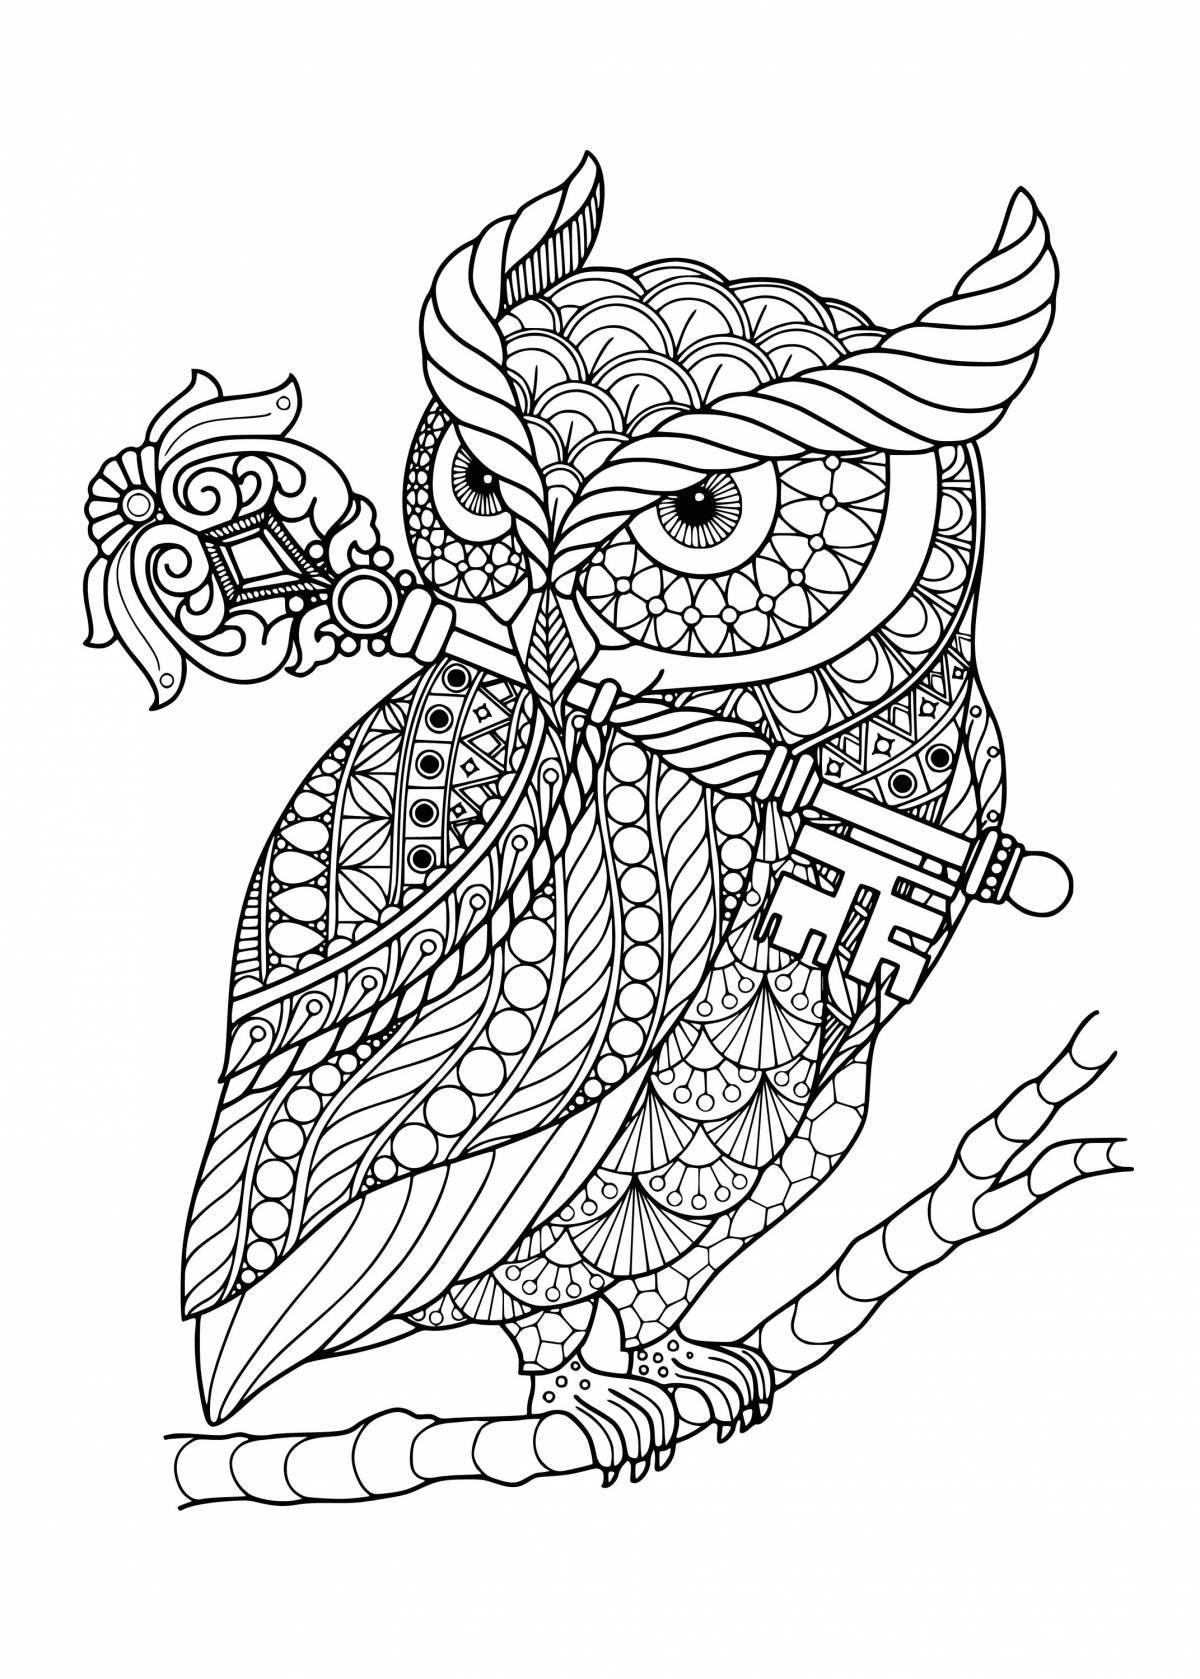 Amazing anti-stress coloring book for adults